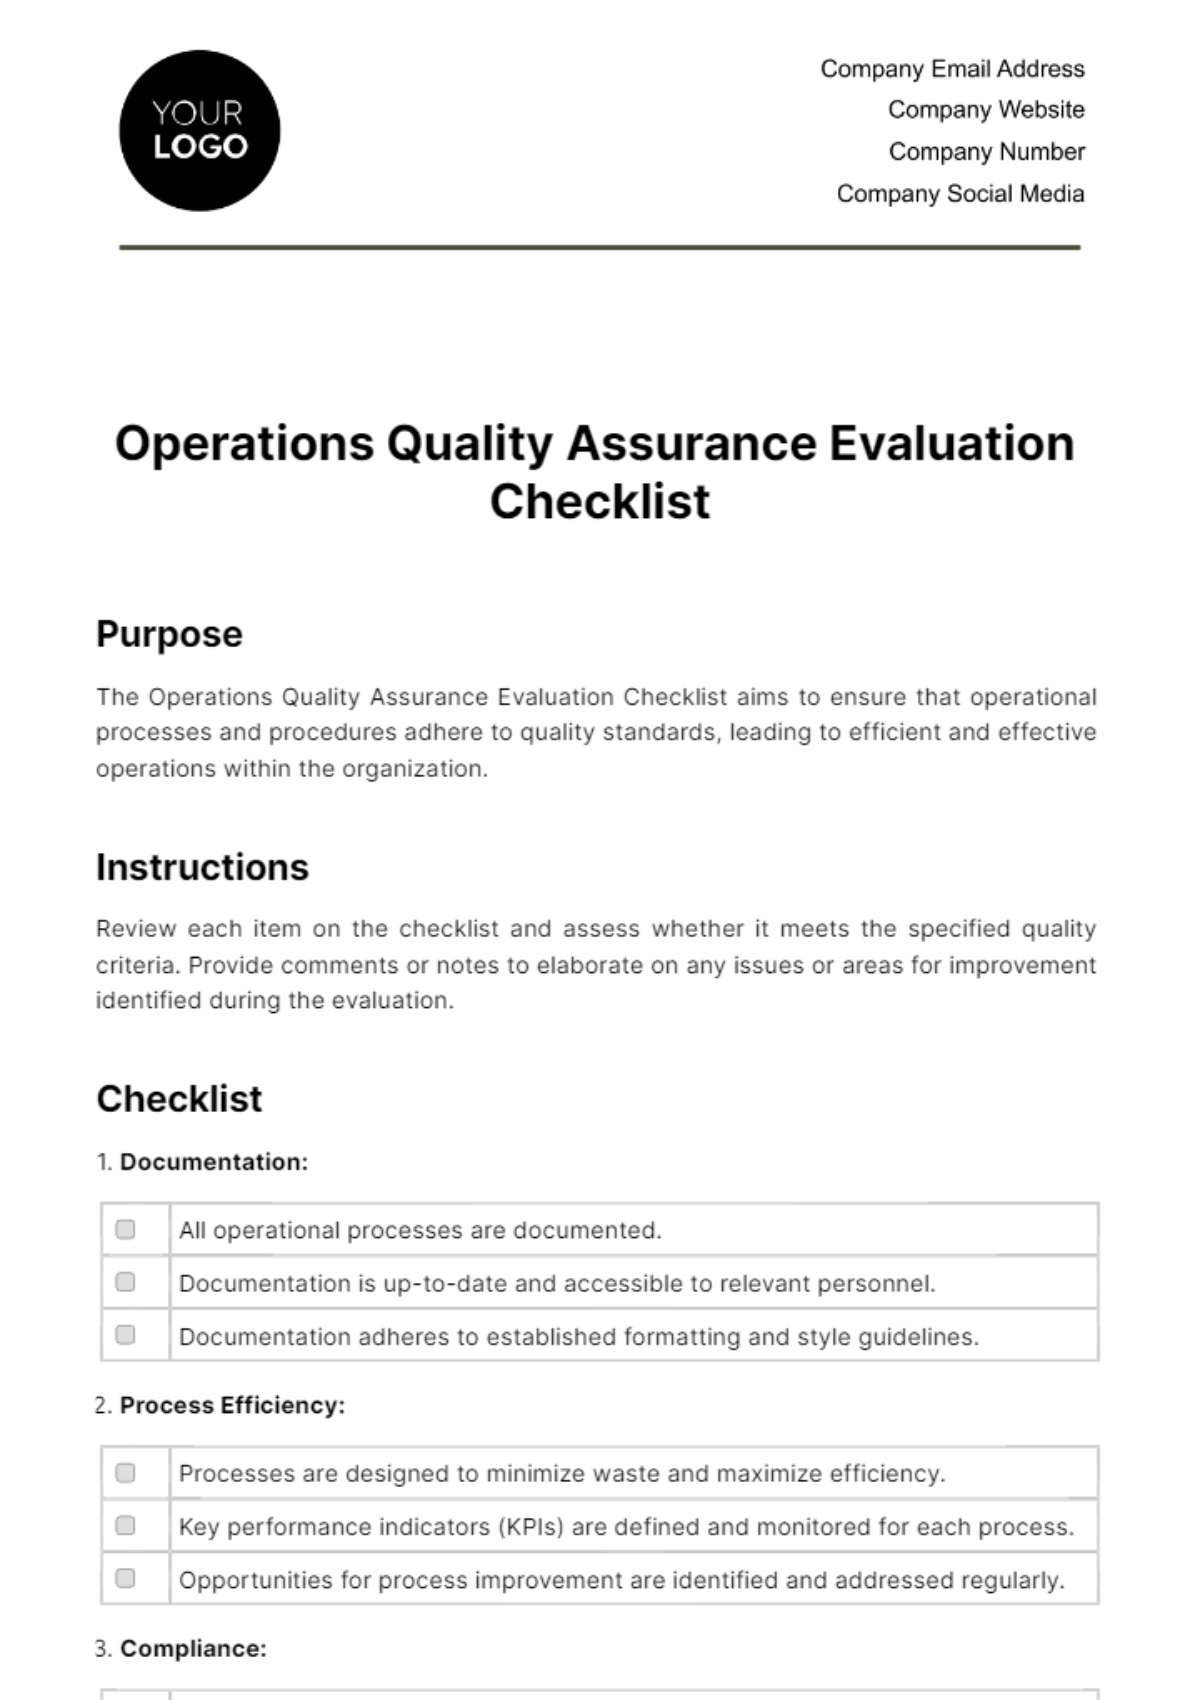 Free Operations Quality Assurance Evaluation Checklist Template